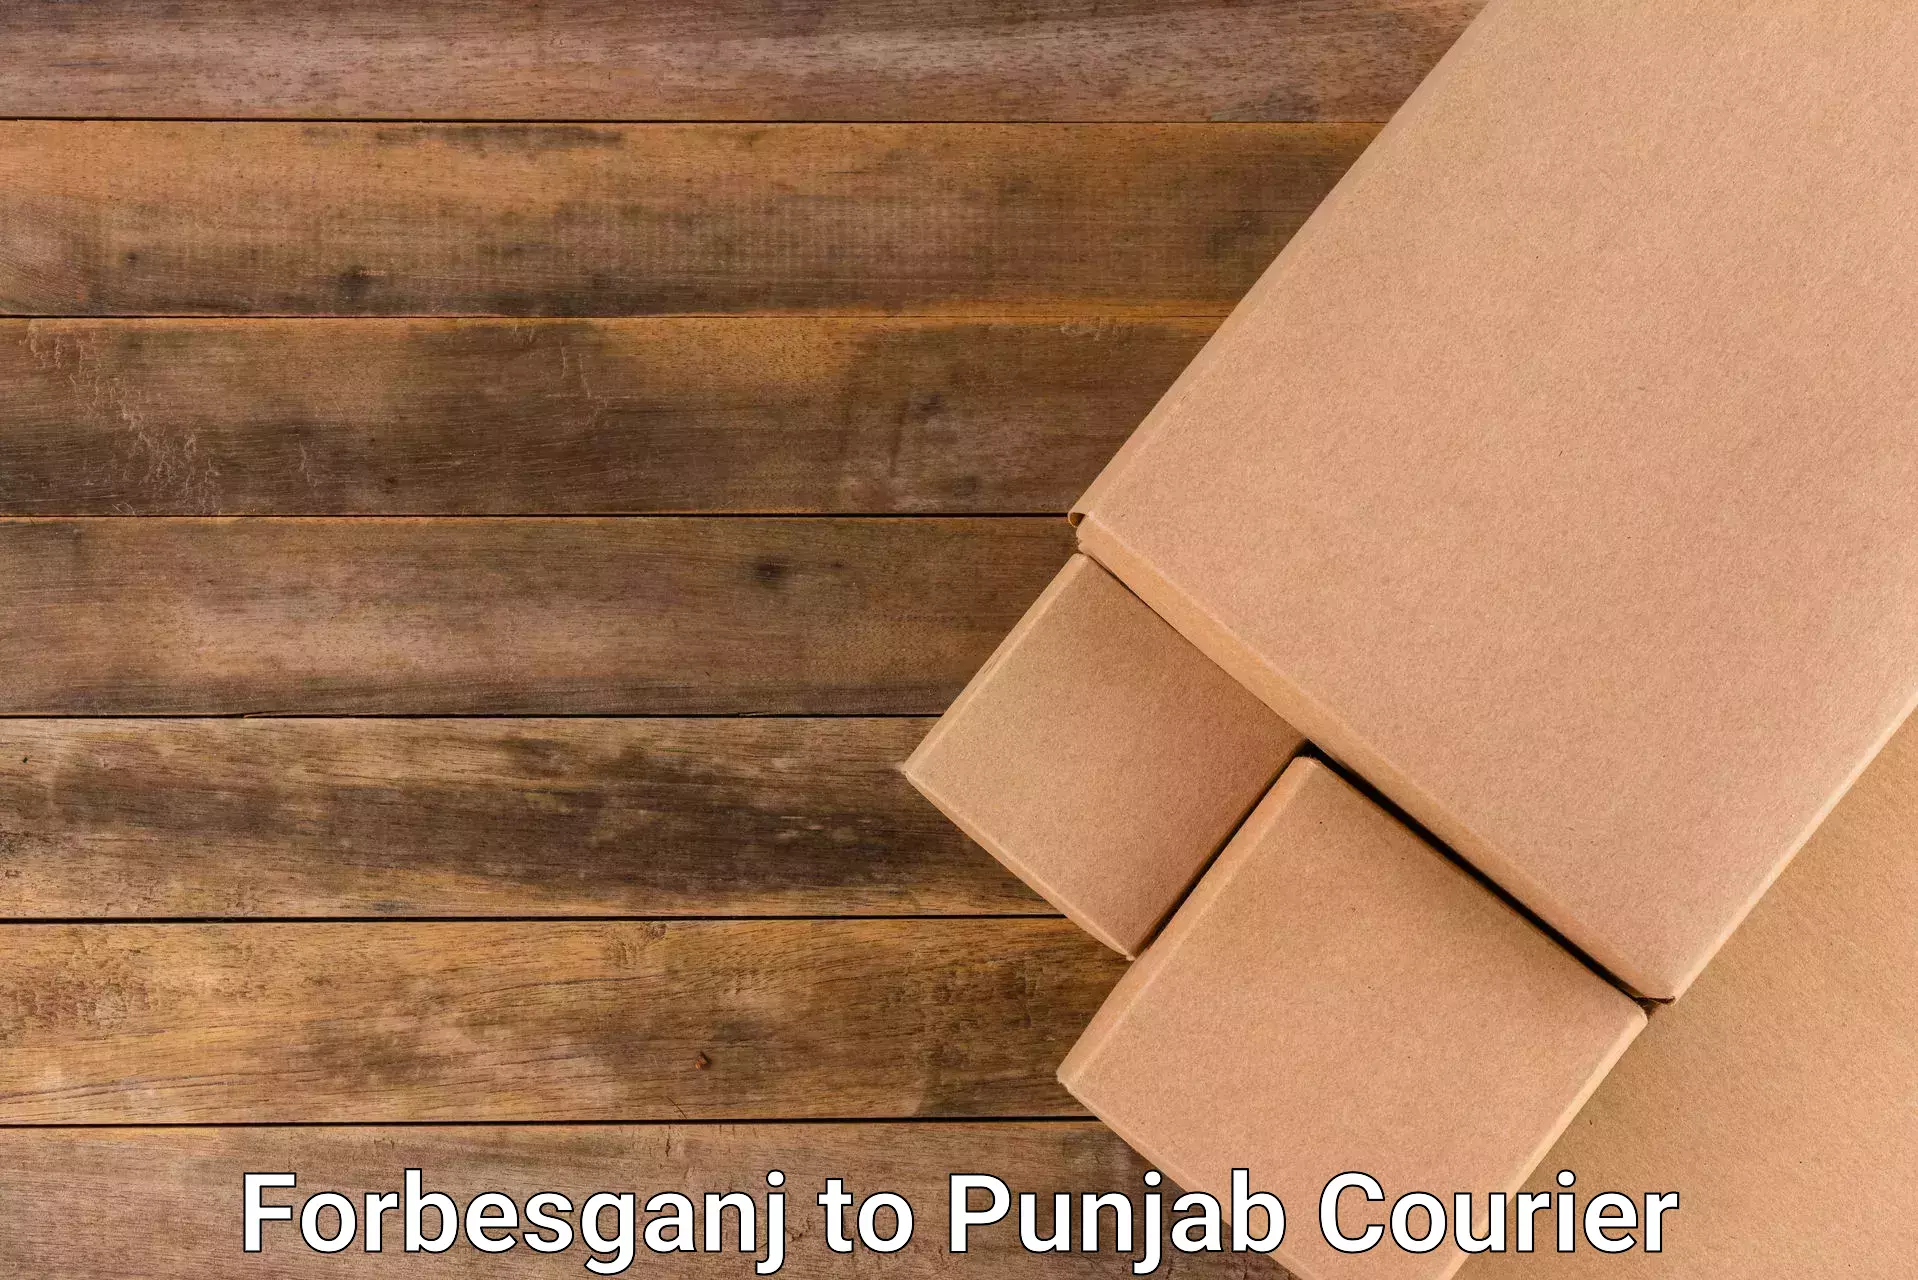 Efficient shipping operations Forbesganj to Mohali